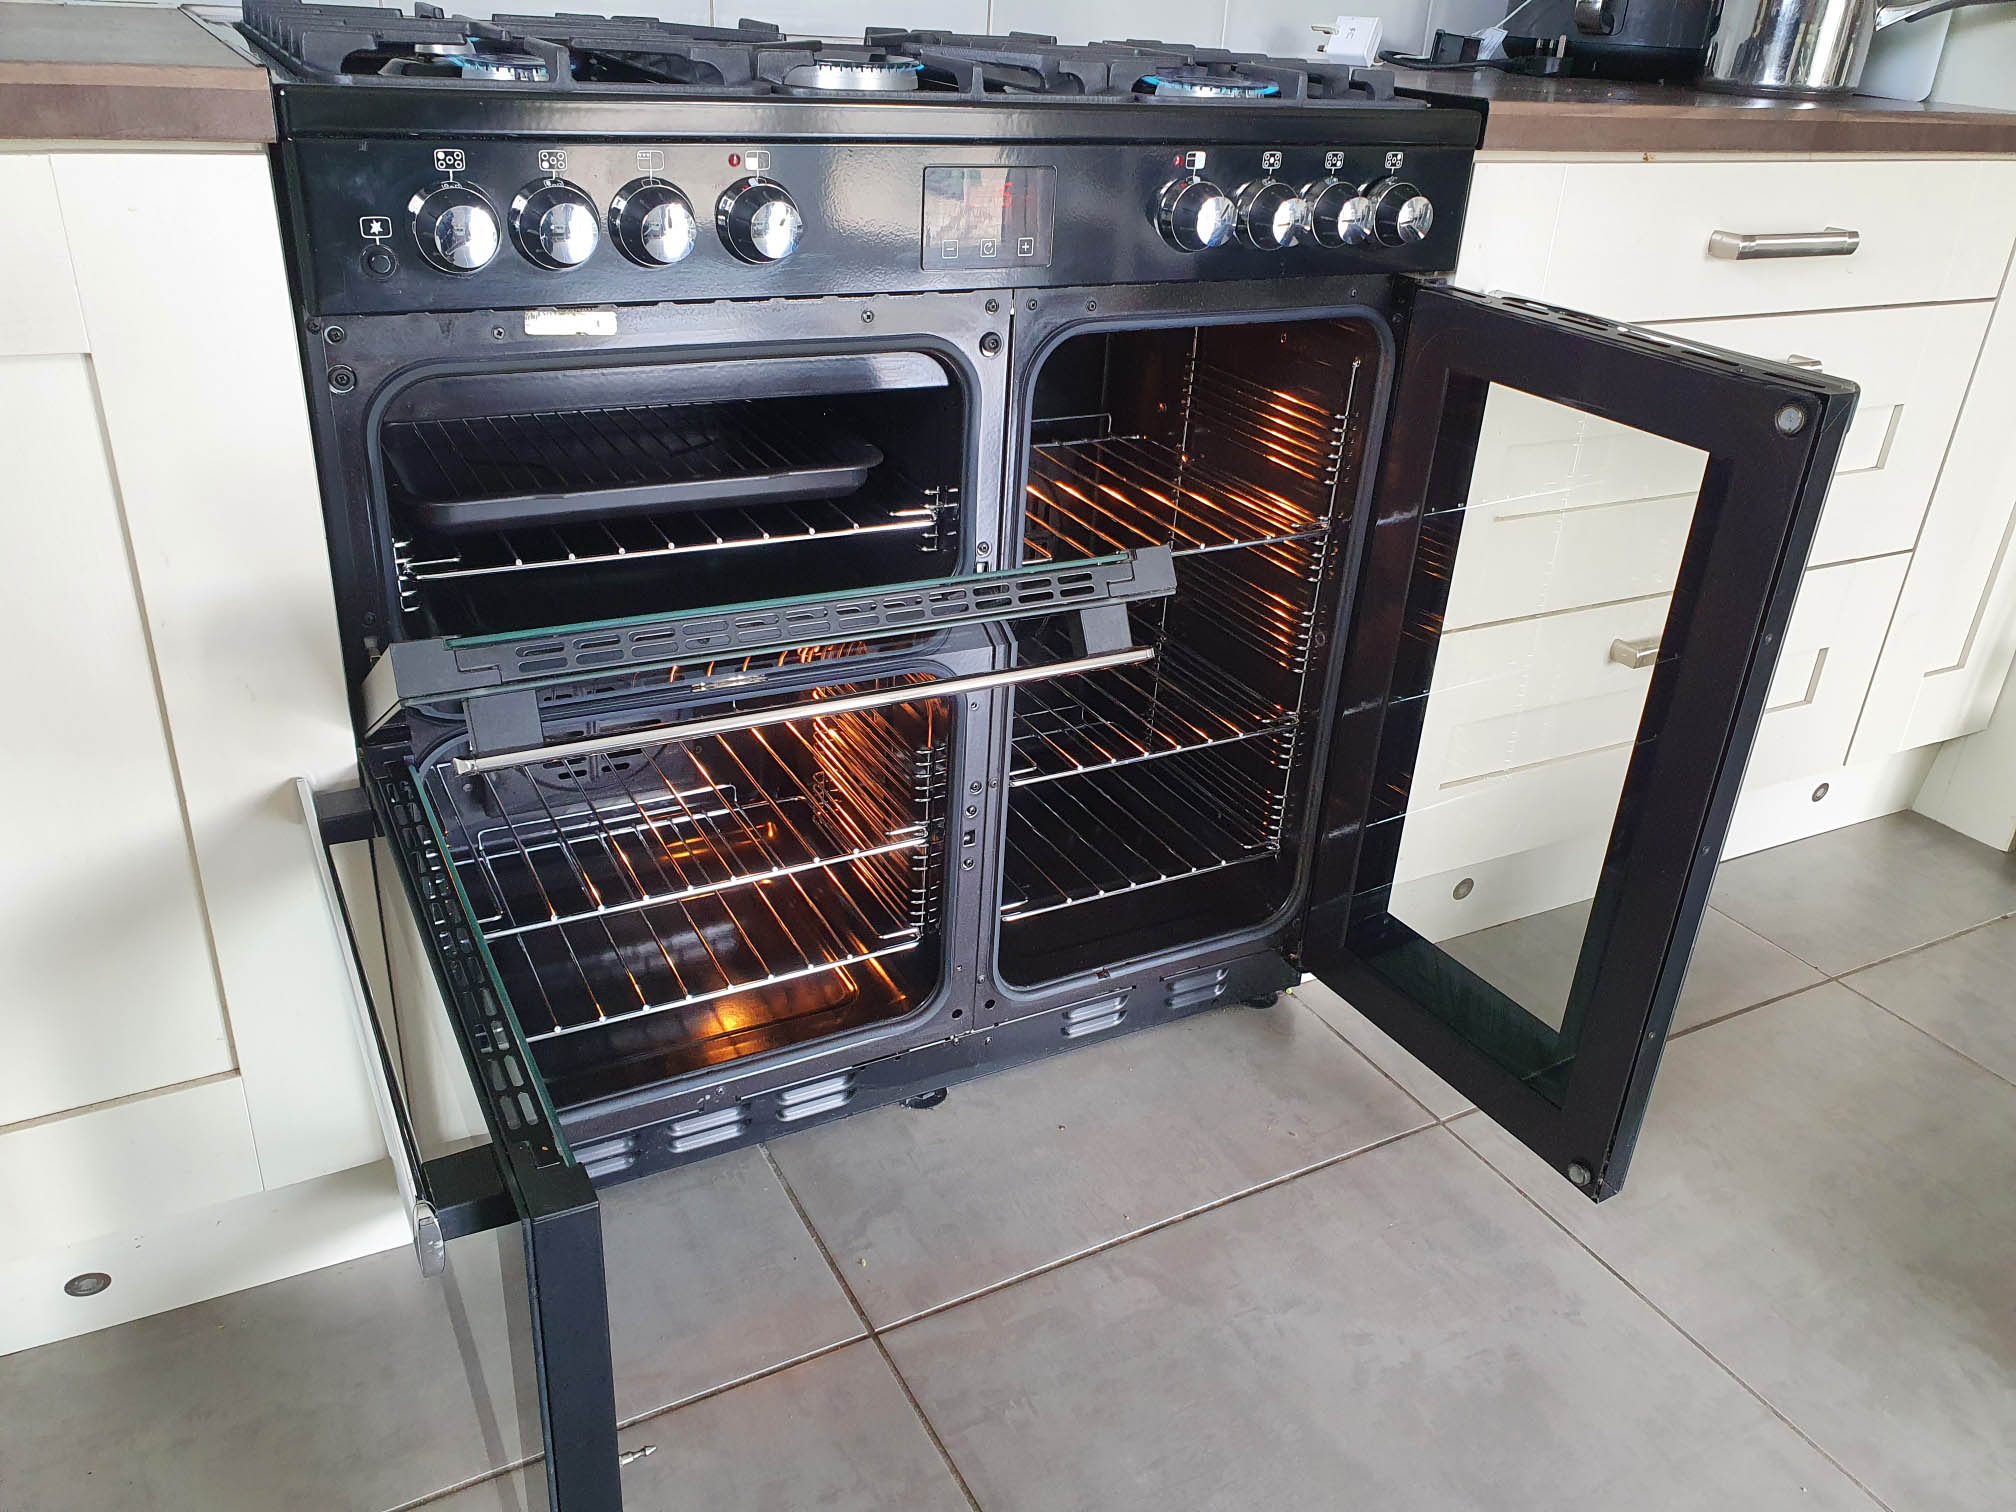 Clean Oven | Clean Oven Belfast | Oven Cleaning NI | Oven Clean ni | Kitchen Cleaning NI | Oven Cleaning Belfast | Kitchen Appliance Cleaning Belfast | Oven Clean NI